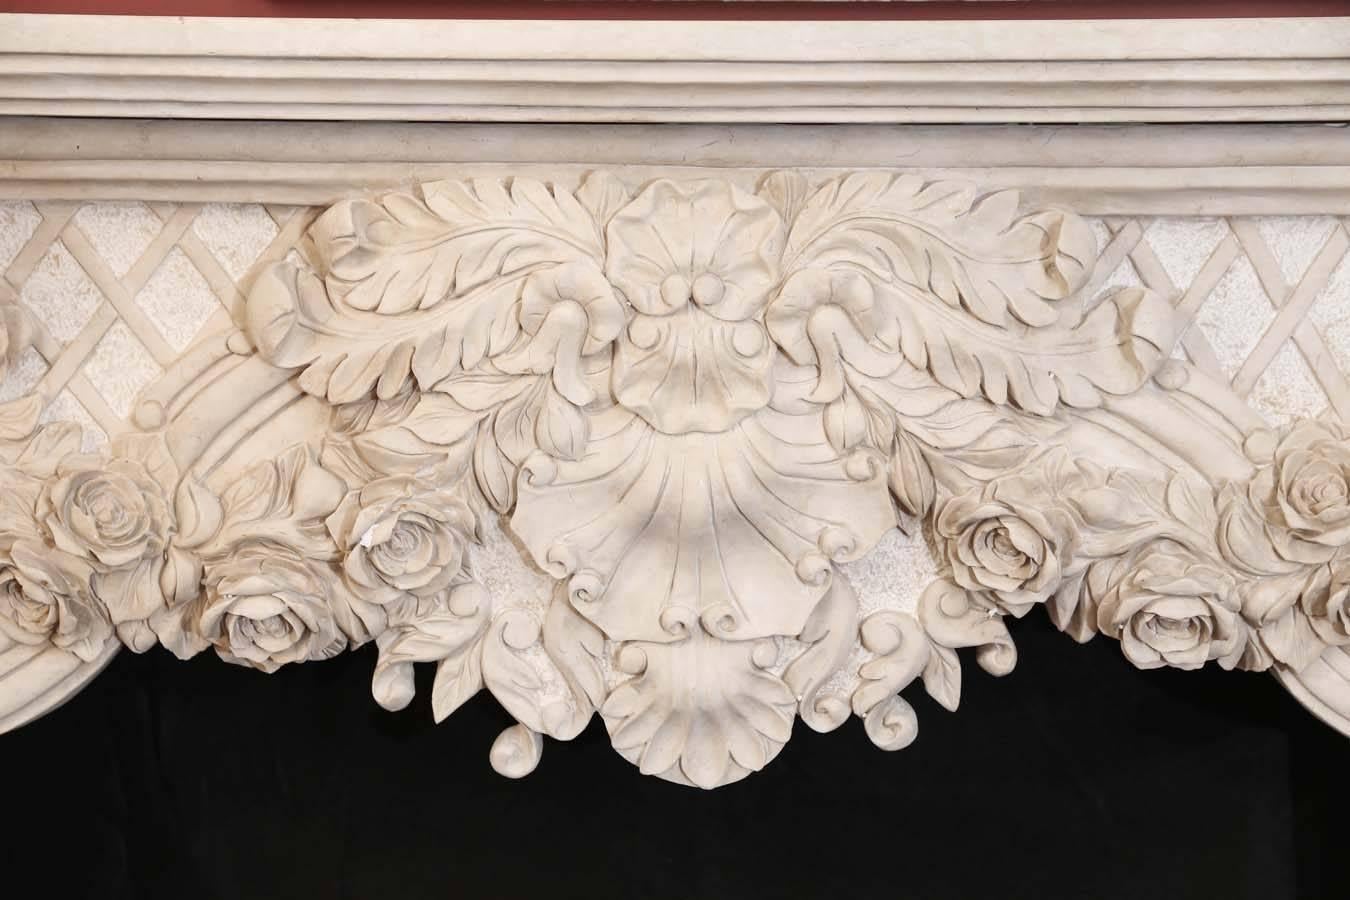 Cream marble mantel carved with flowers and foliate designs on the front
and sides in elaborate detail. This mantel would be a lovely addition to
a new home or restoration project. It is available and ready to ship.